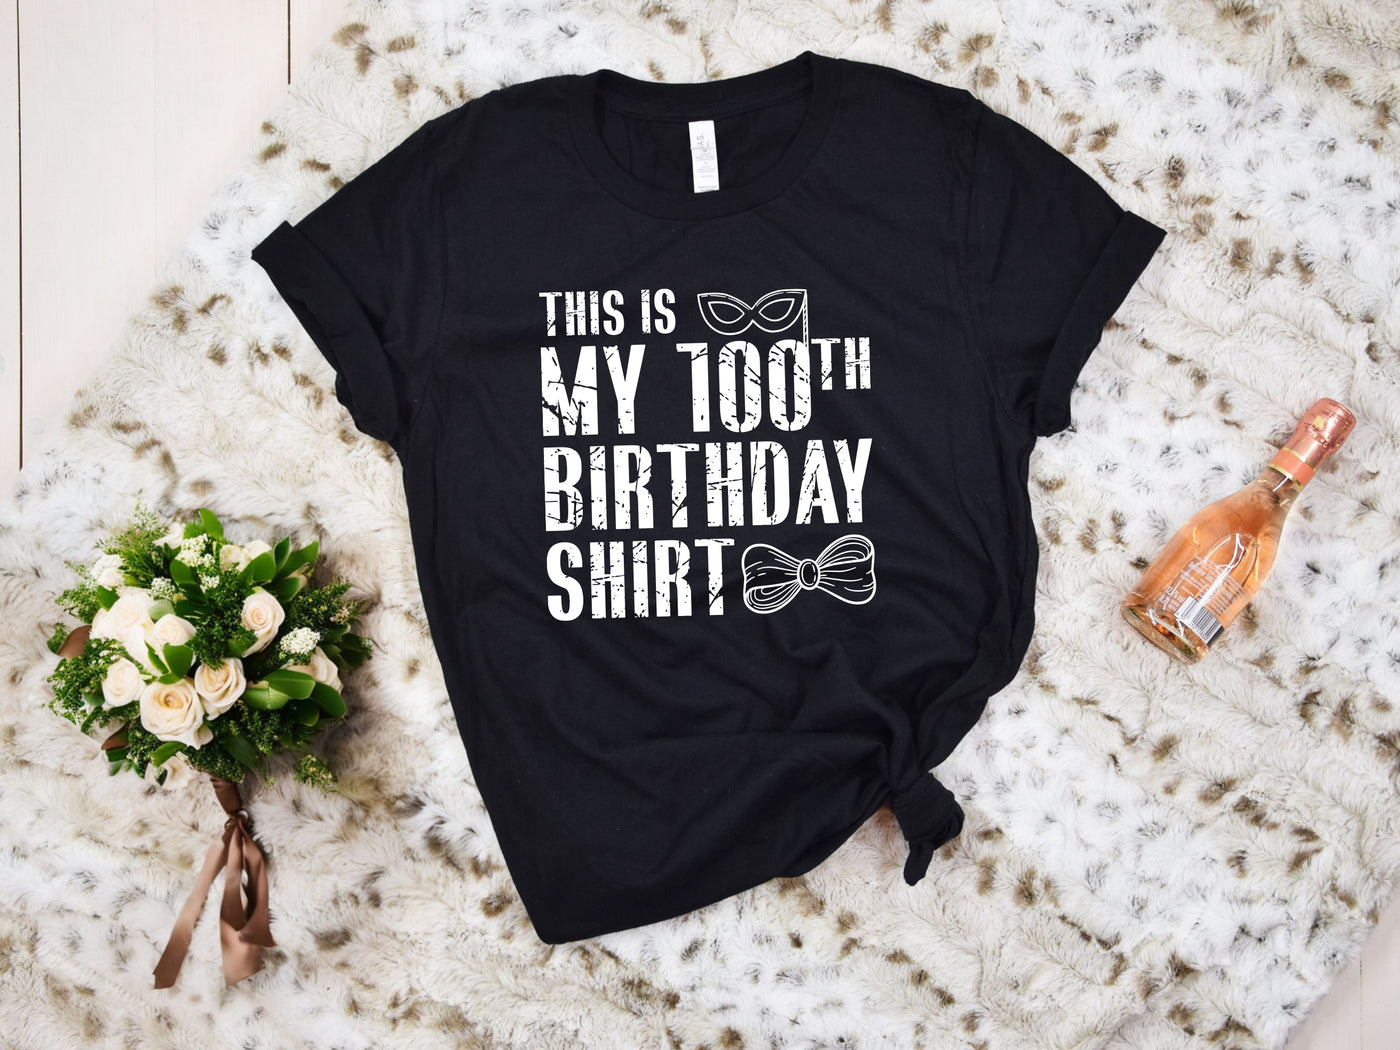 This is My 100th Birthday